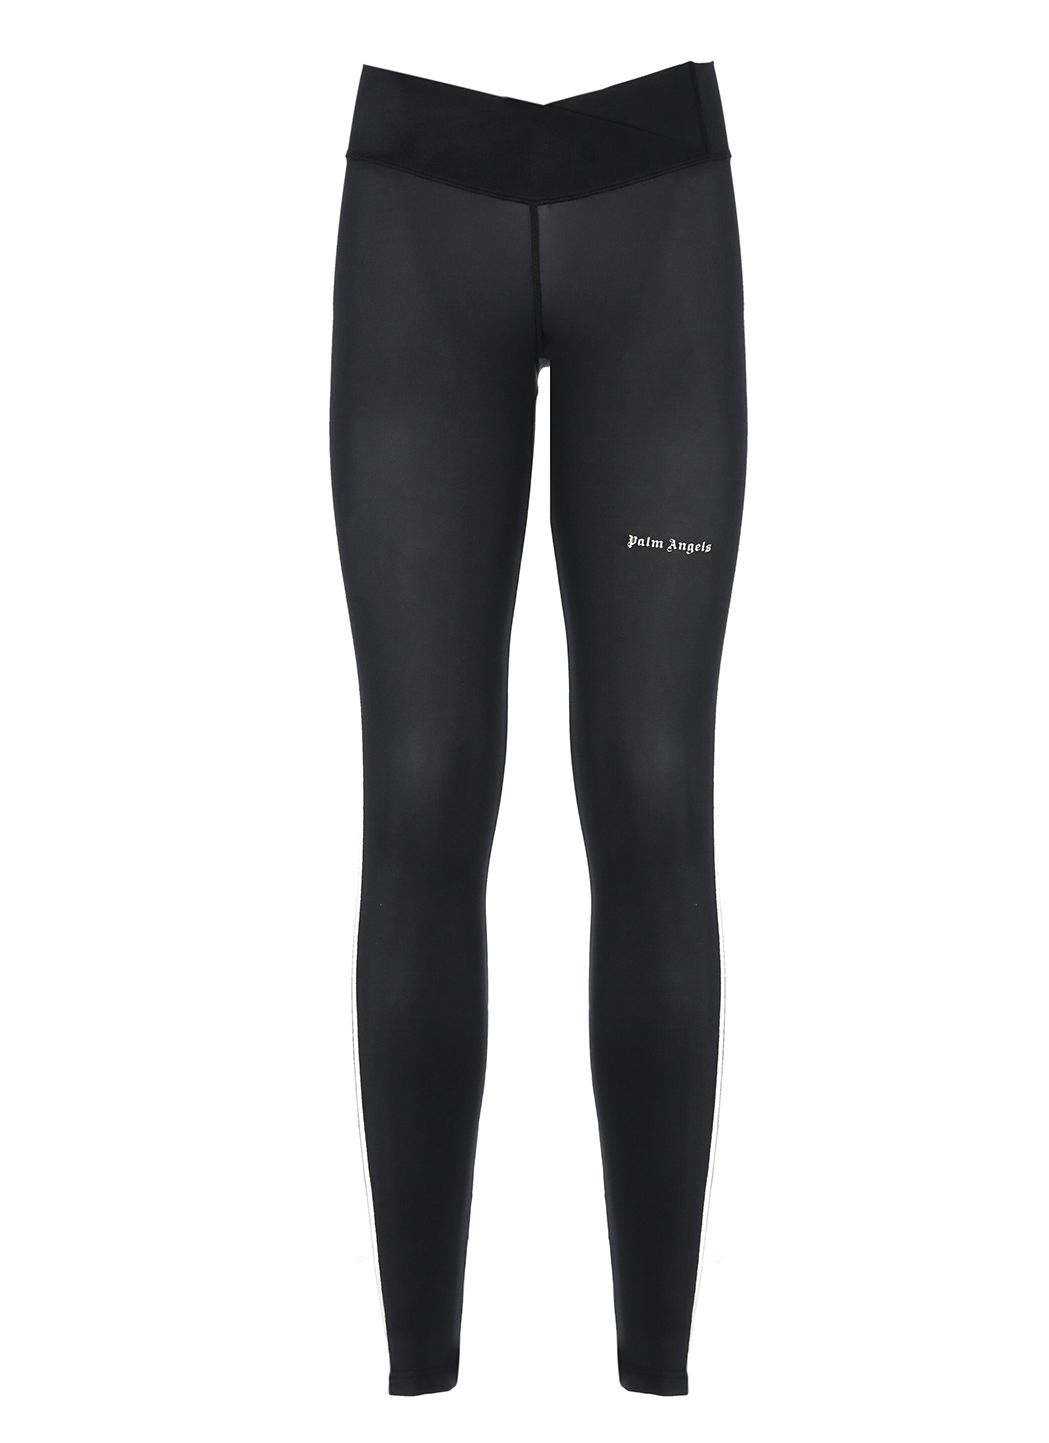 Black New Classic Leggings by Palm Angels on Sale